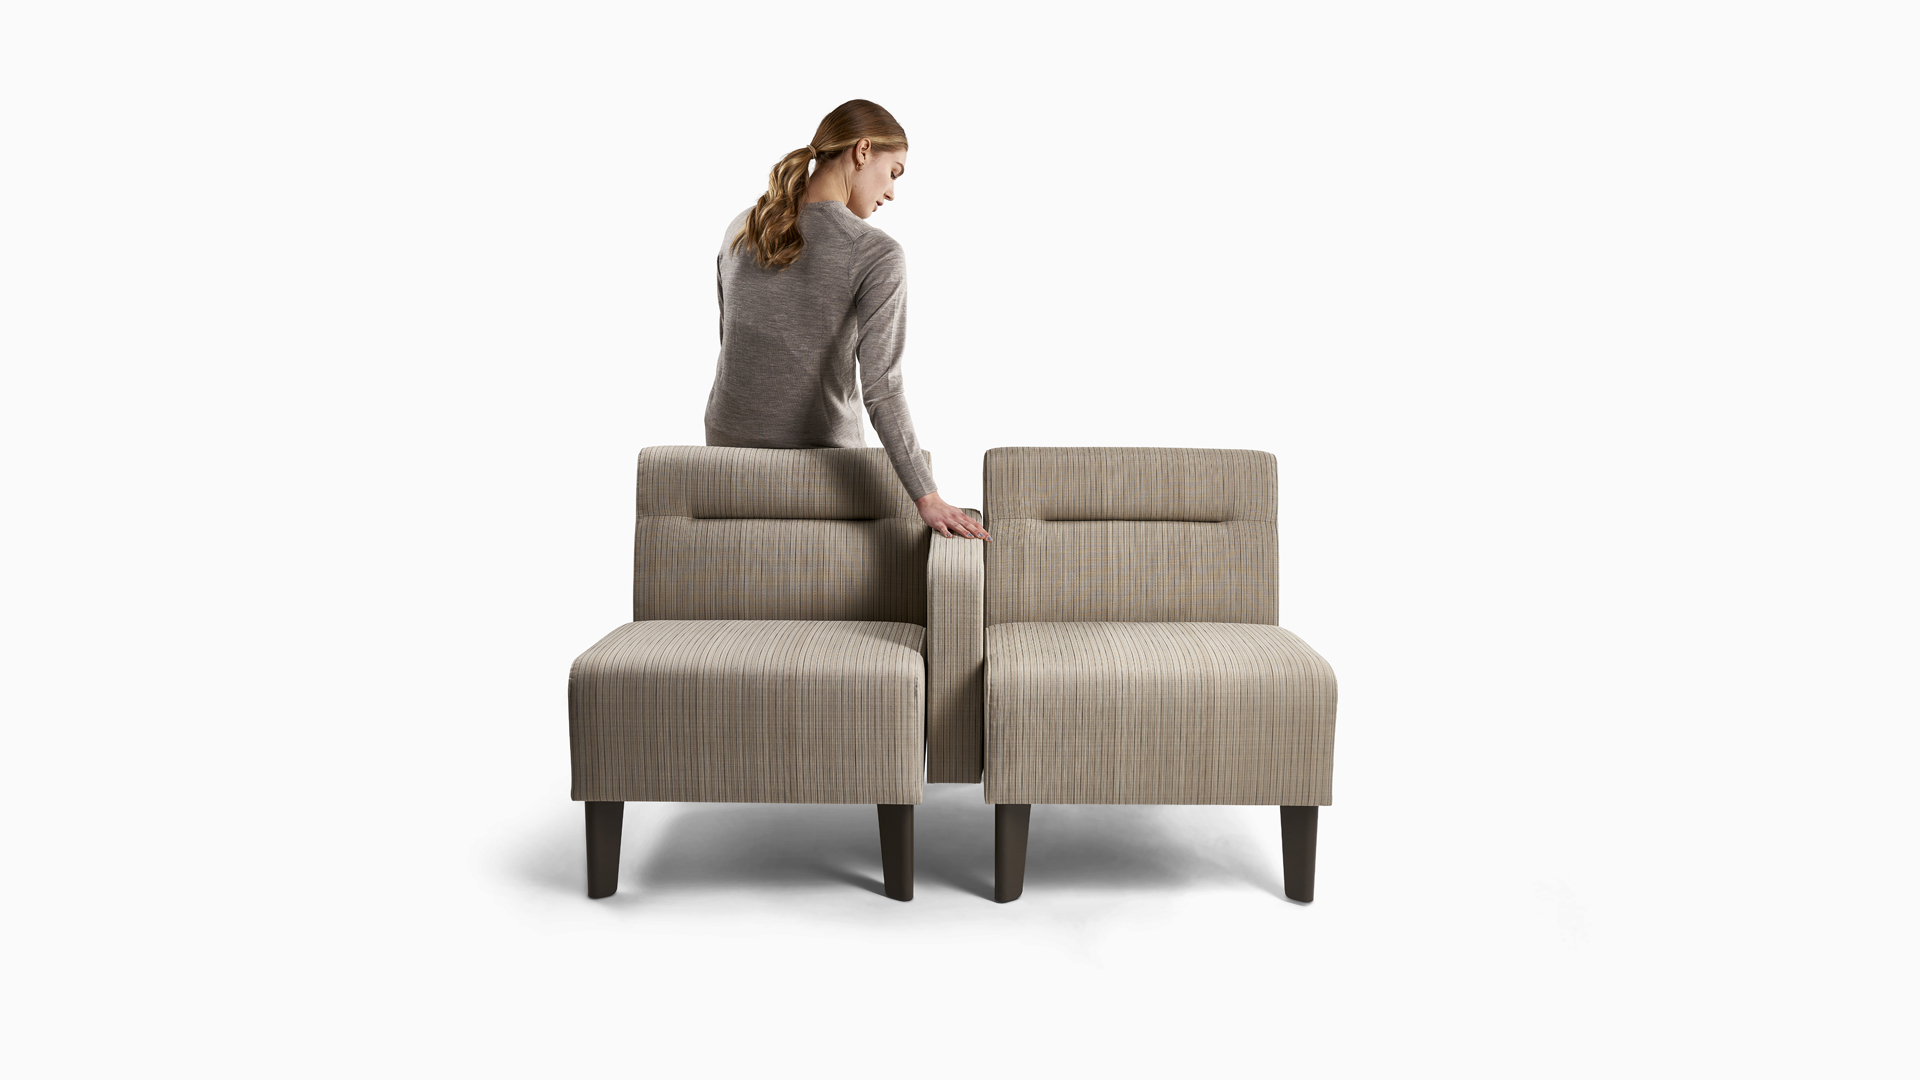 Avila ganged lounge chairs with middle upholstered arm.